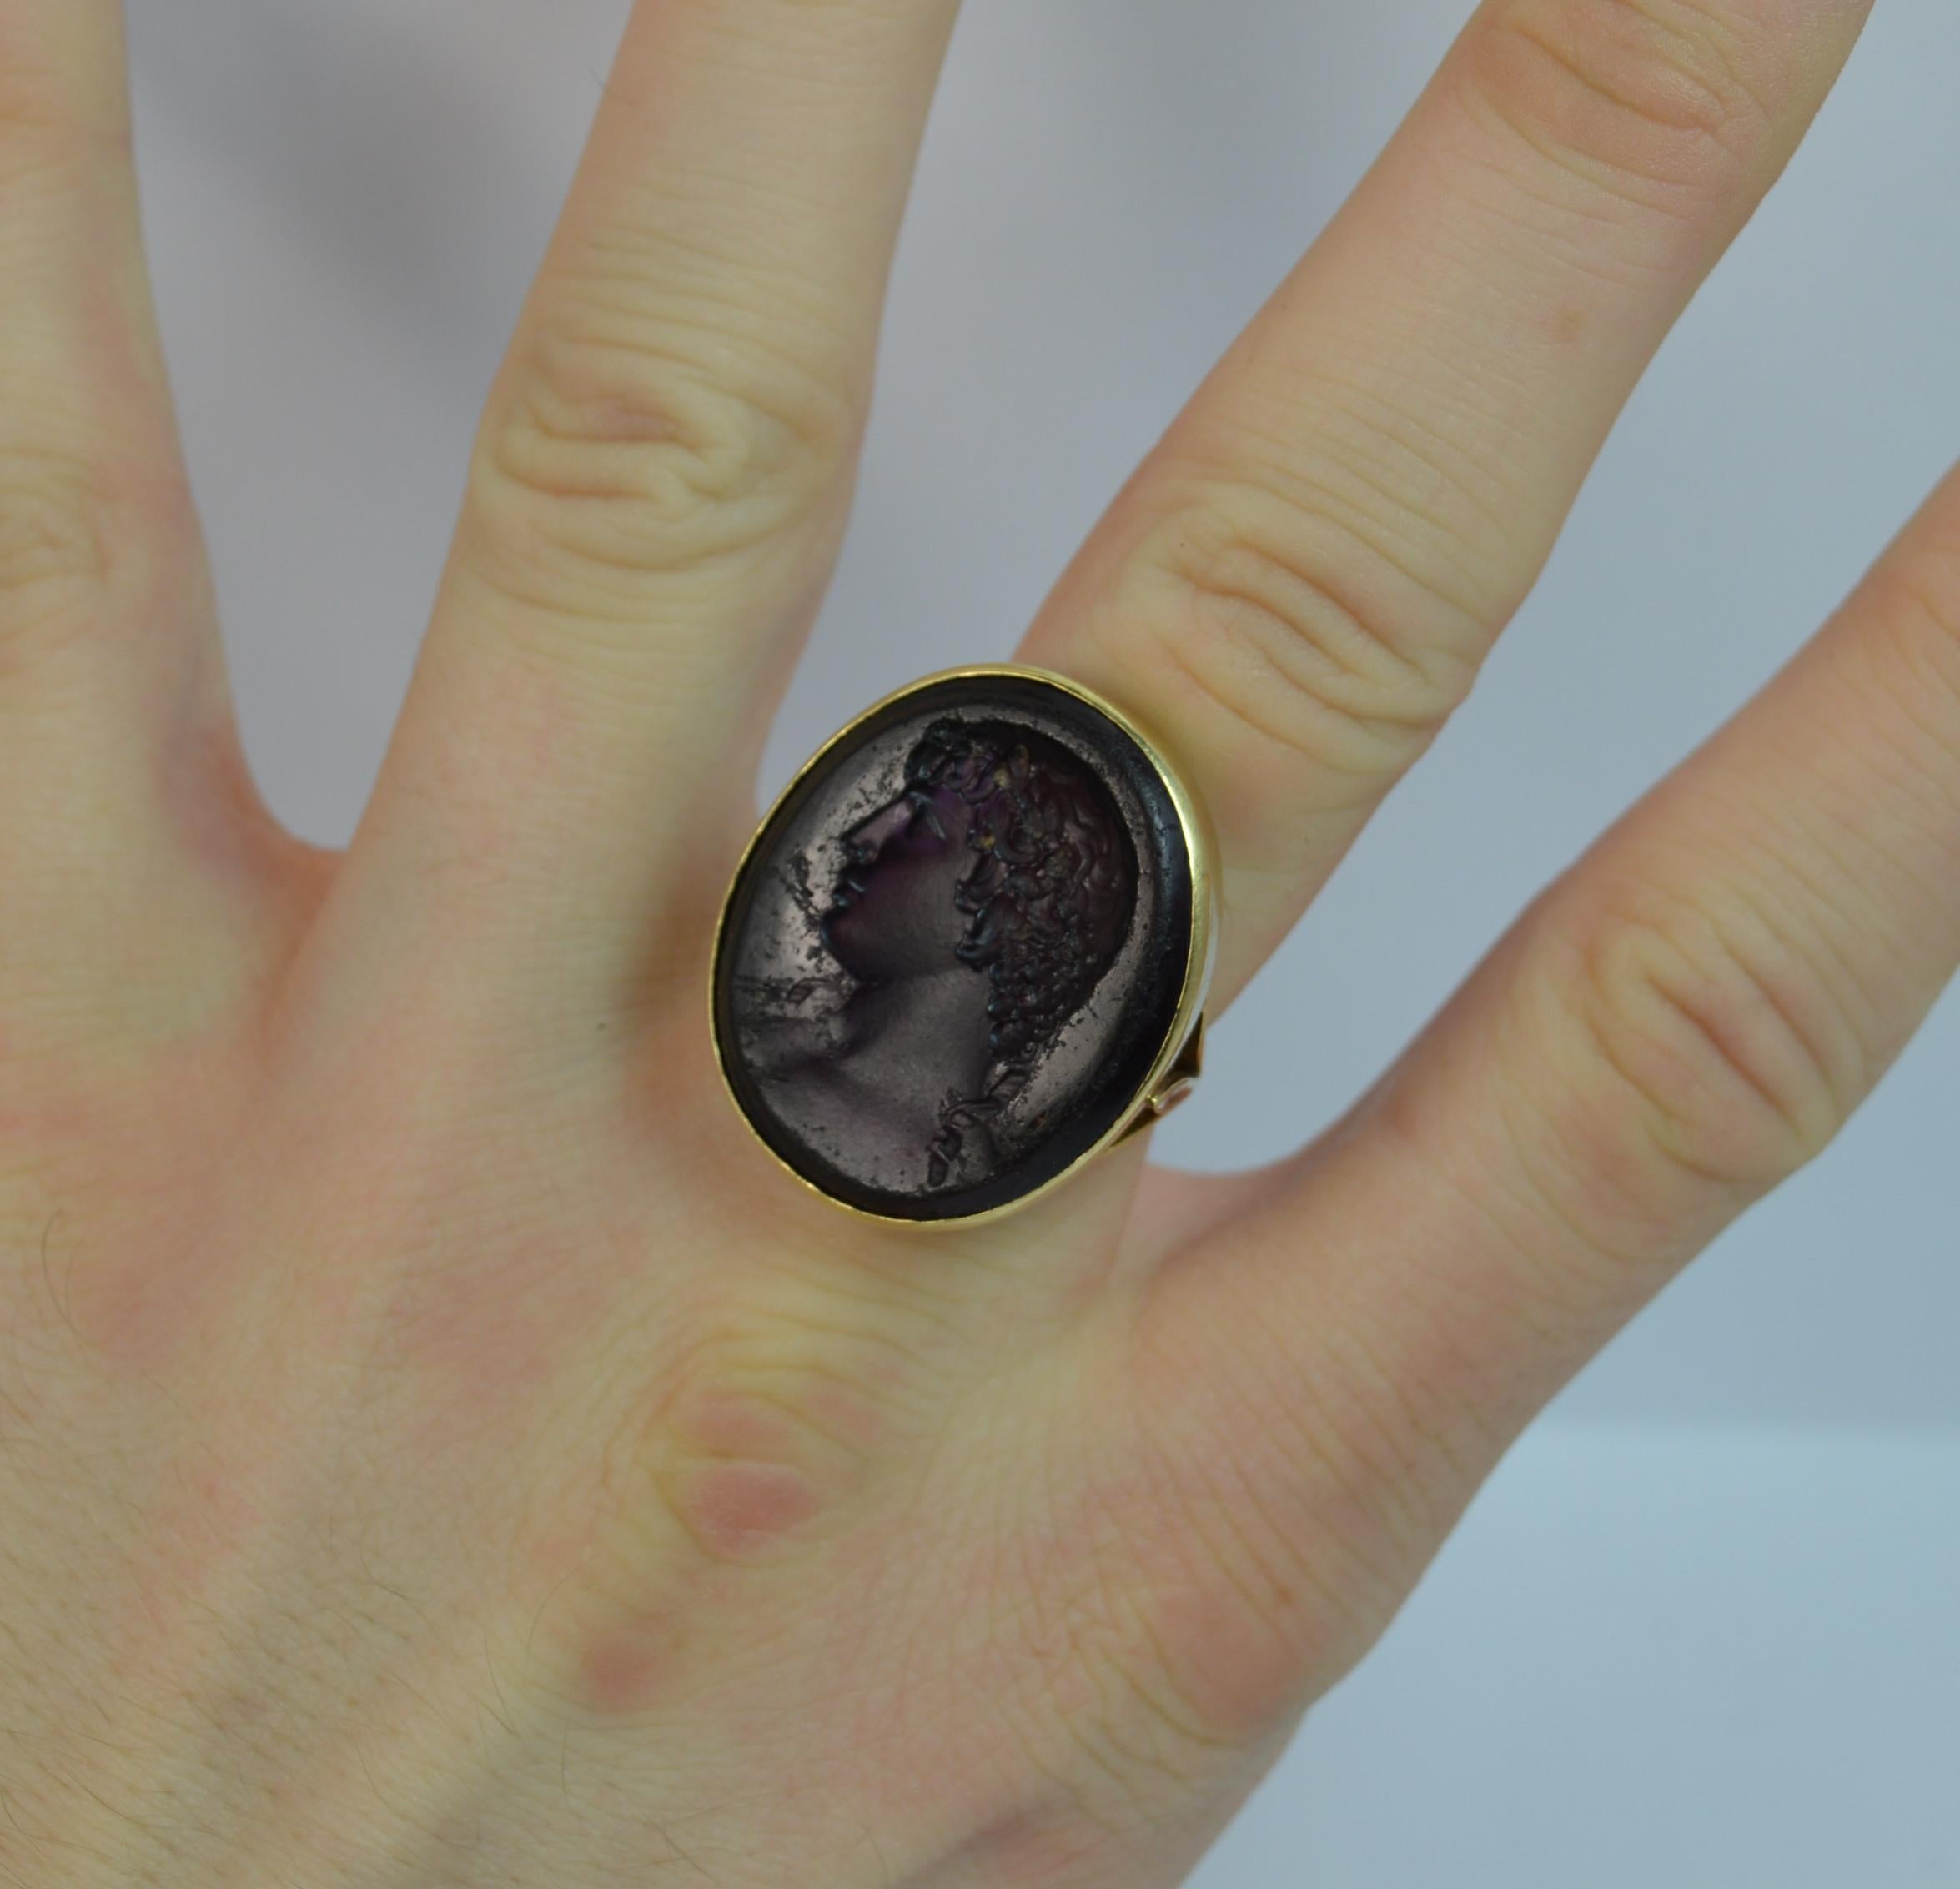 A stunning 18 carat gold and purple amethyst glass ring.
SIZE ; O 1/2 UK, 7 1/2 US
A signet seal intaglio ring. The face depicting a classical male bust of superb detail. 22mm x 26mm head.

Modelled onto a solid 18 carat yellow gold shank with fleur